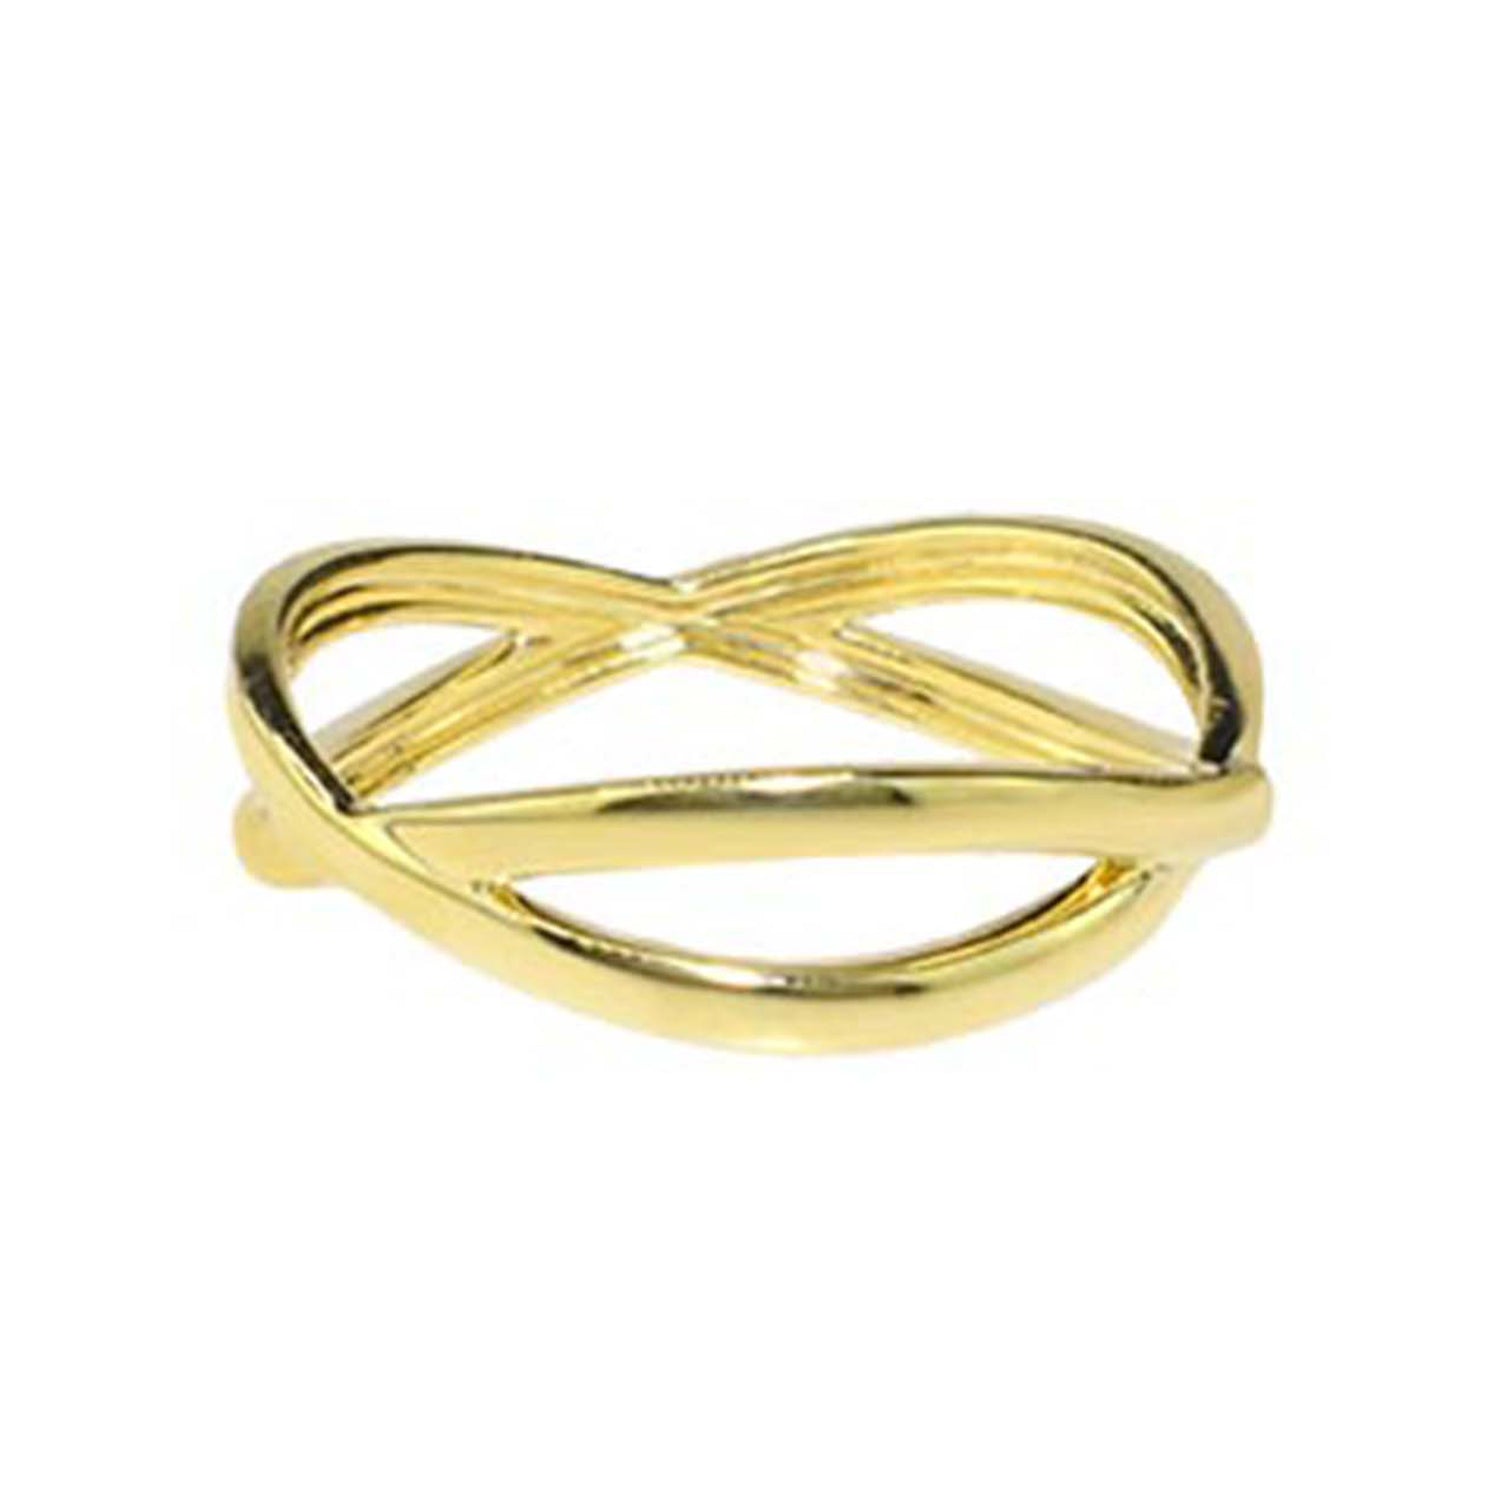 Séchic 14k Intertwined Band Ring